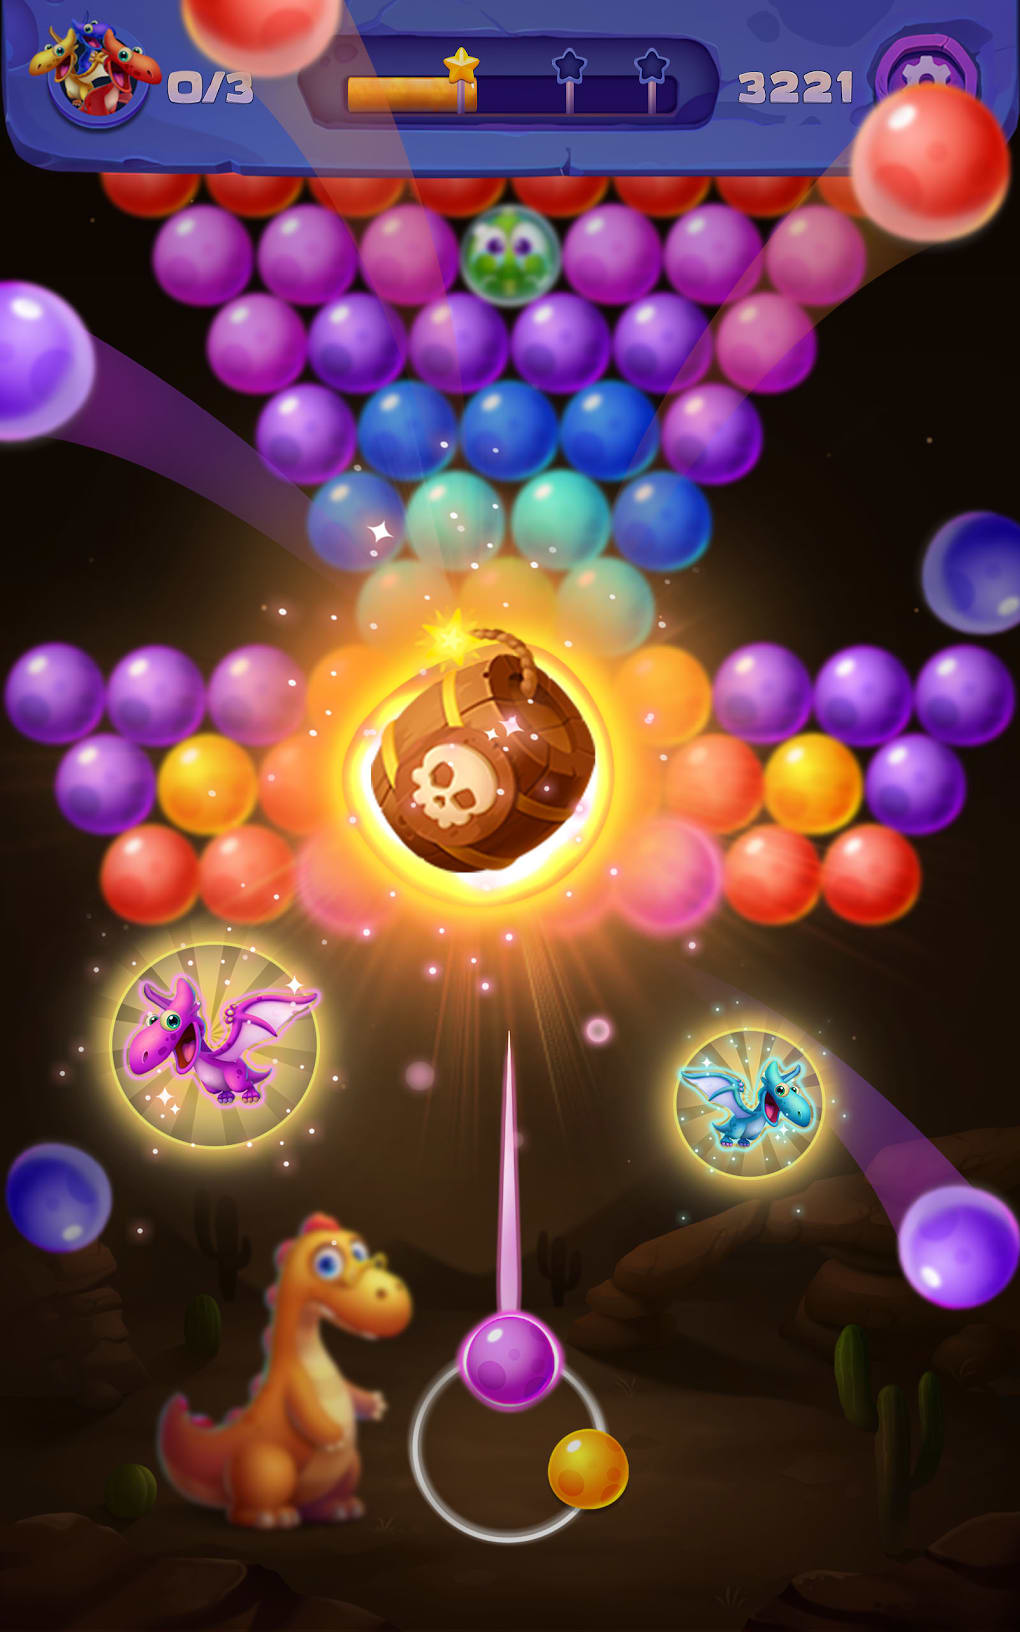 Shoot Bubble Gameplay, Bubble Shooting games New Levels 9-14